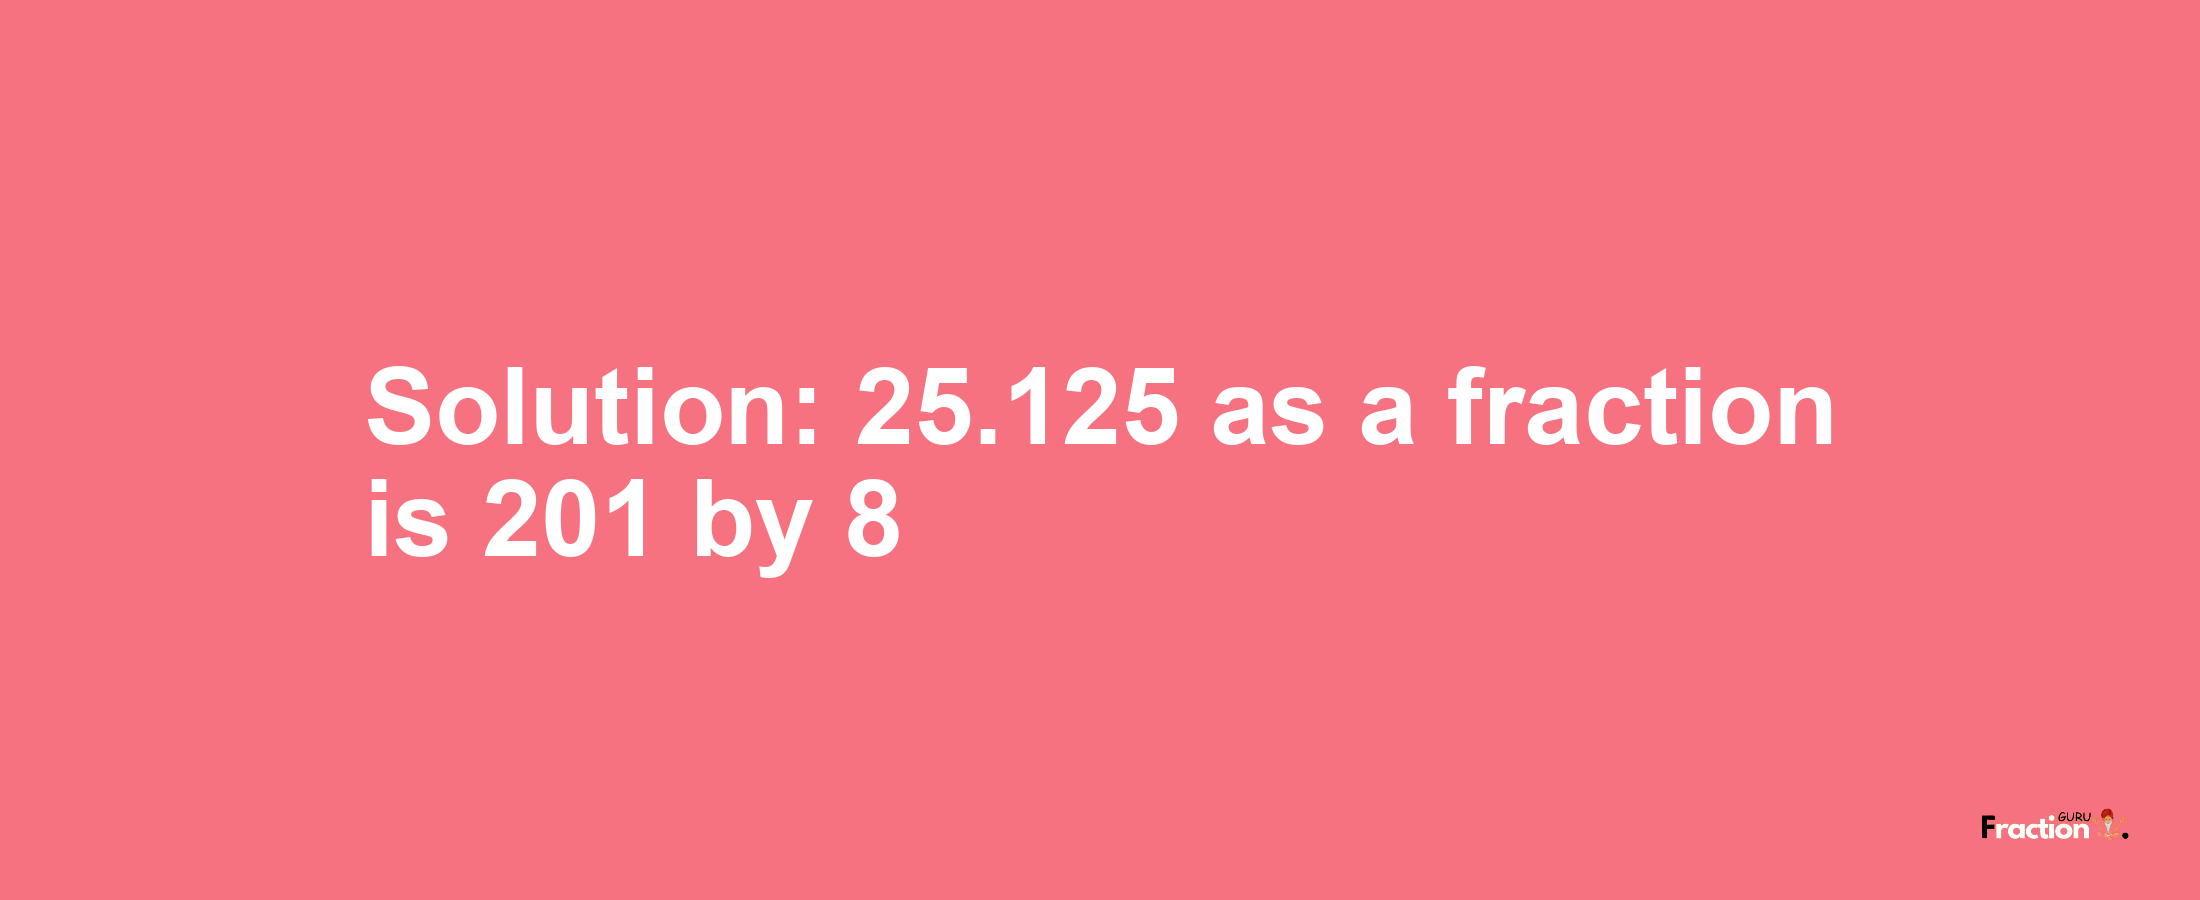 Solution:25.125 as a fraction is 201/8